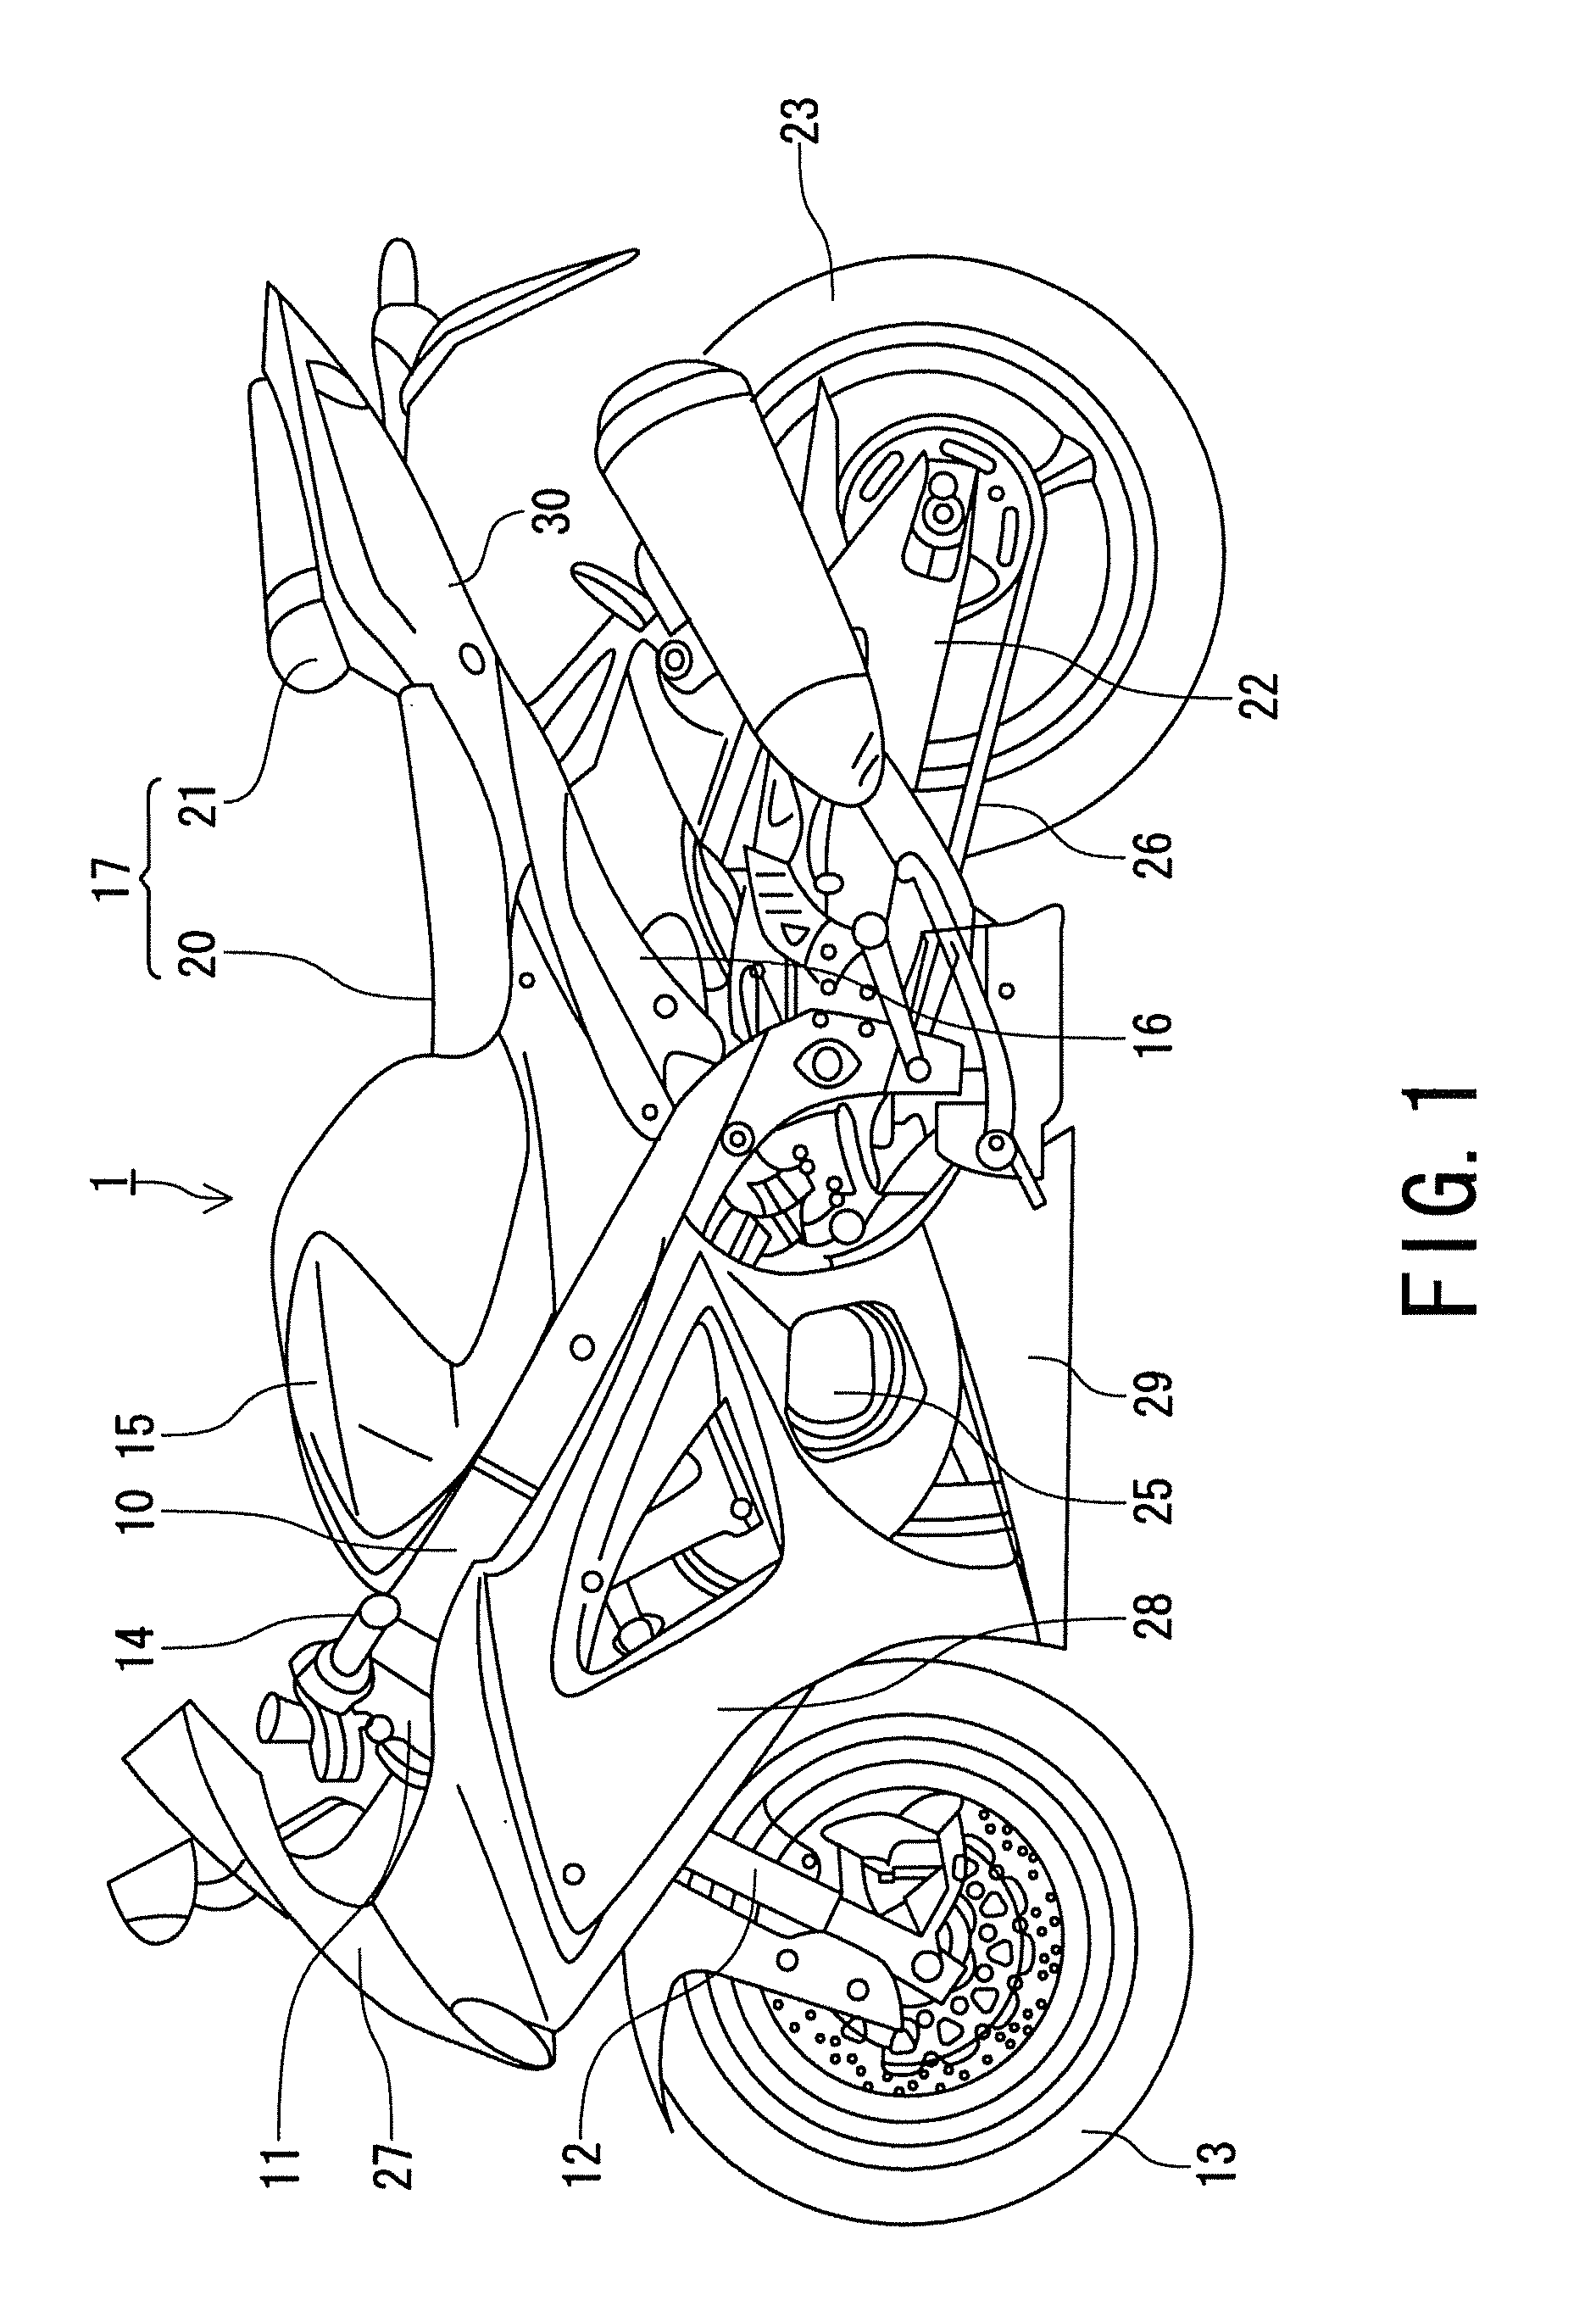 Vehicle body frame of motorcycle